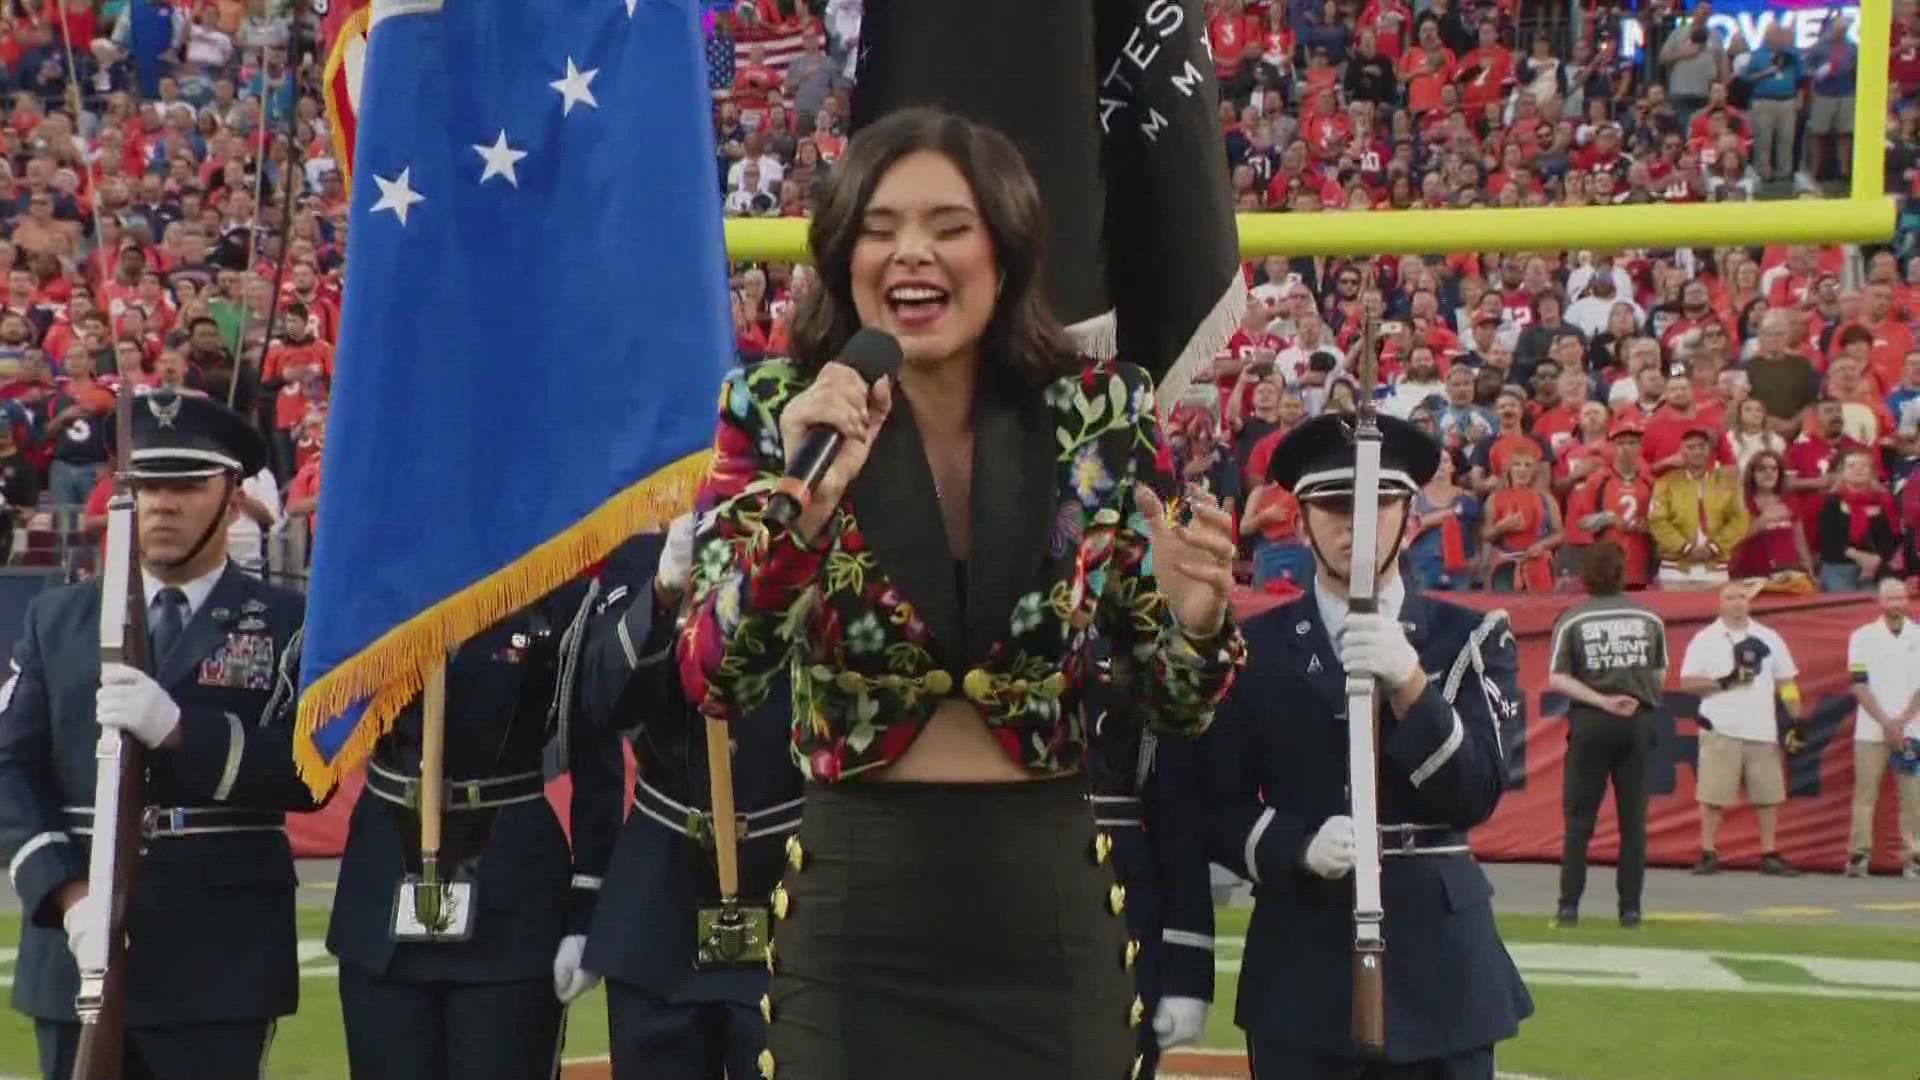 Former 9NEWS meteorologist Belen De Leon said she was honored to be chosen to sing the anthem as part of the NFL’s celebration of Hispanic Heritage Month.